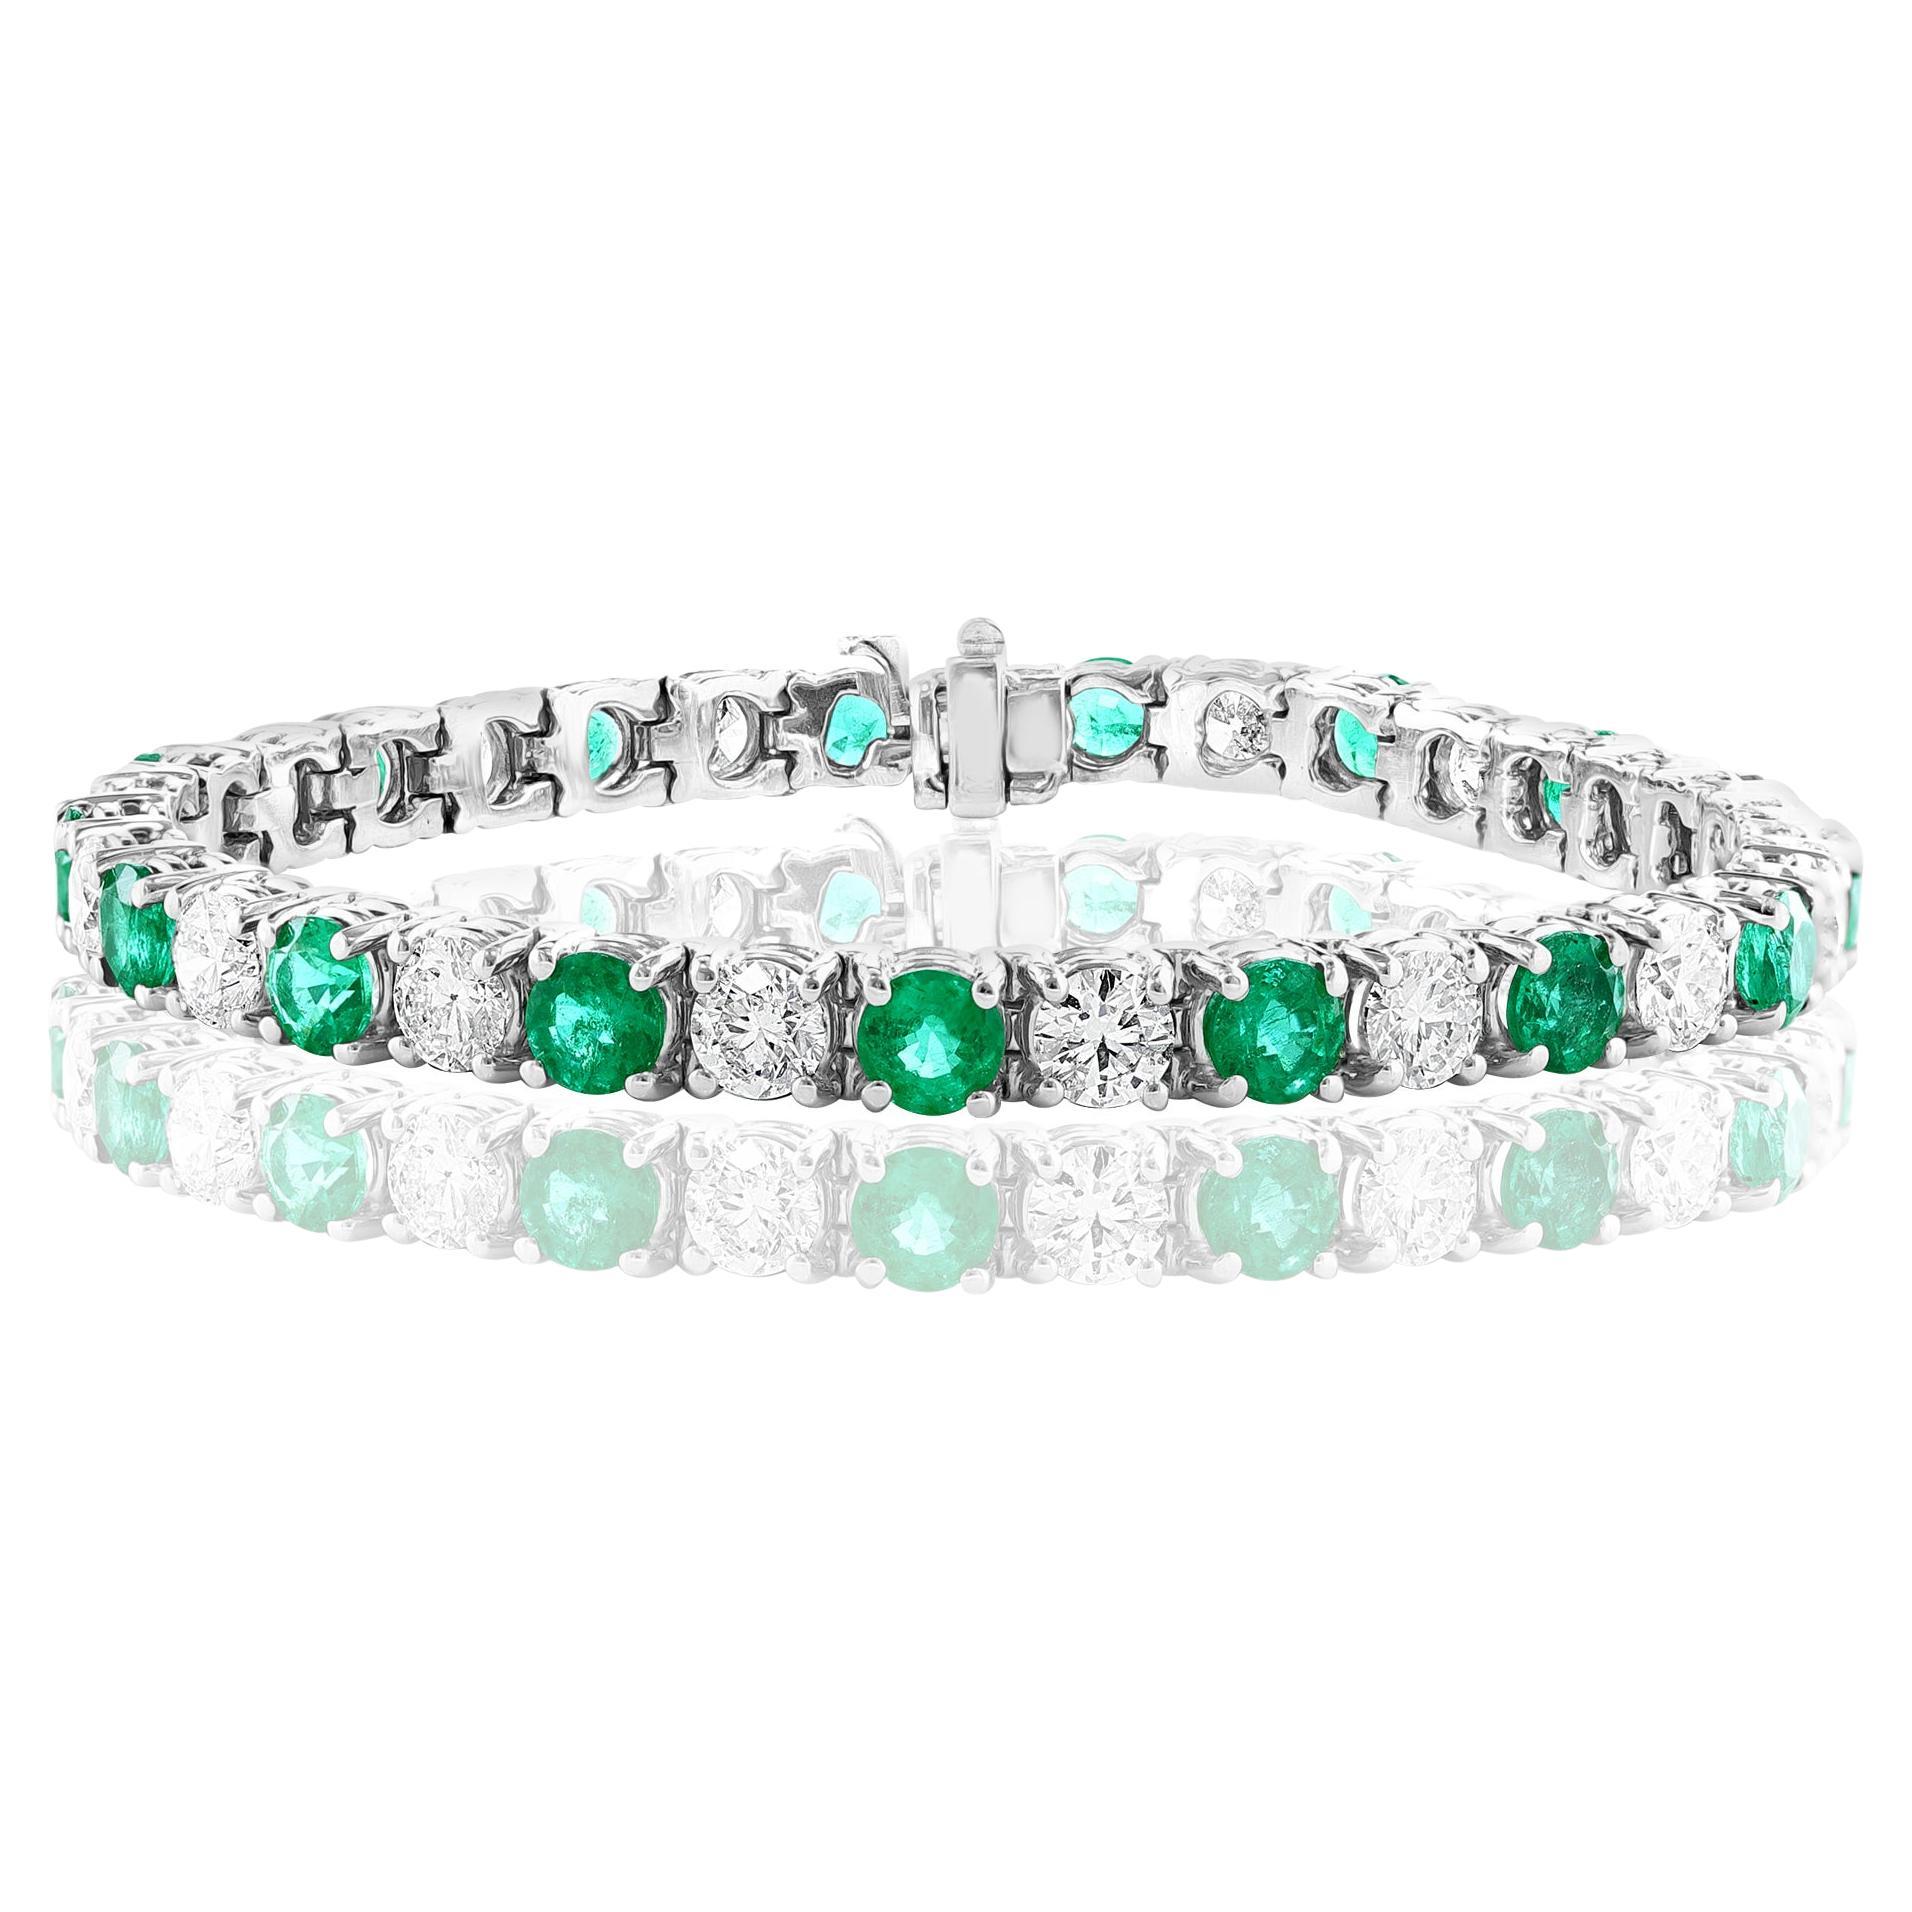 7.48 Carat Emerald and Diamond Tennis Bracelet in 14K White Gold For Sale